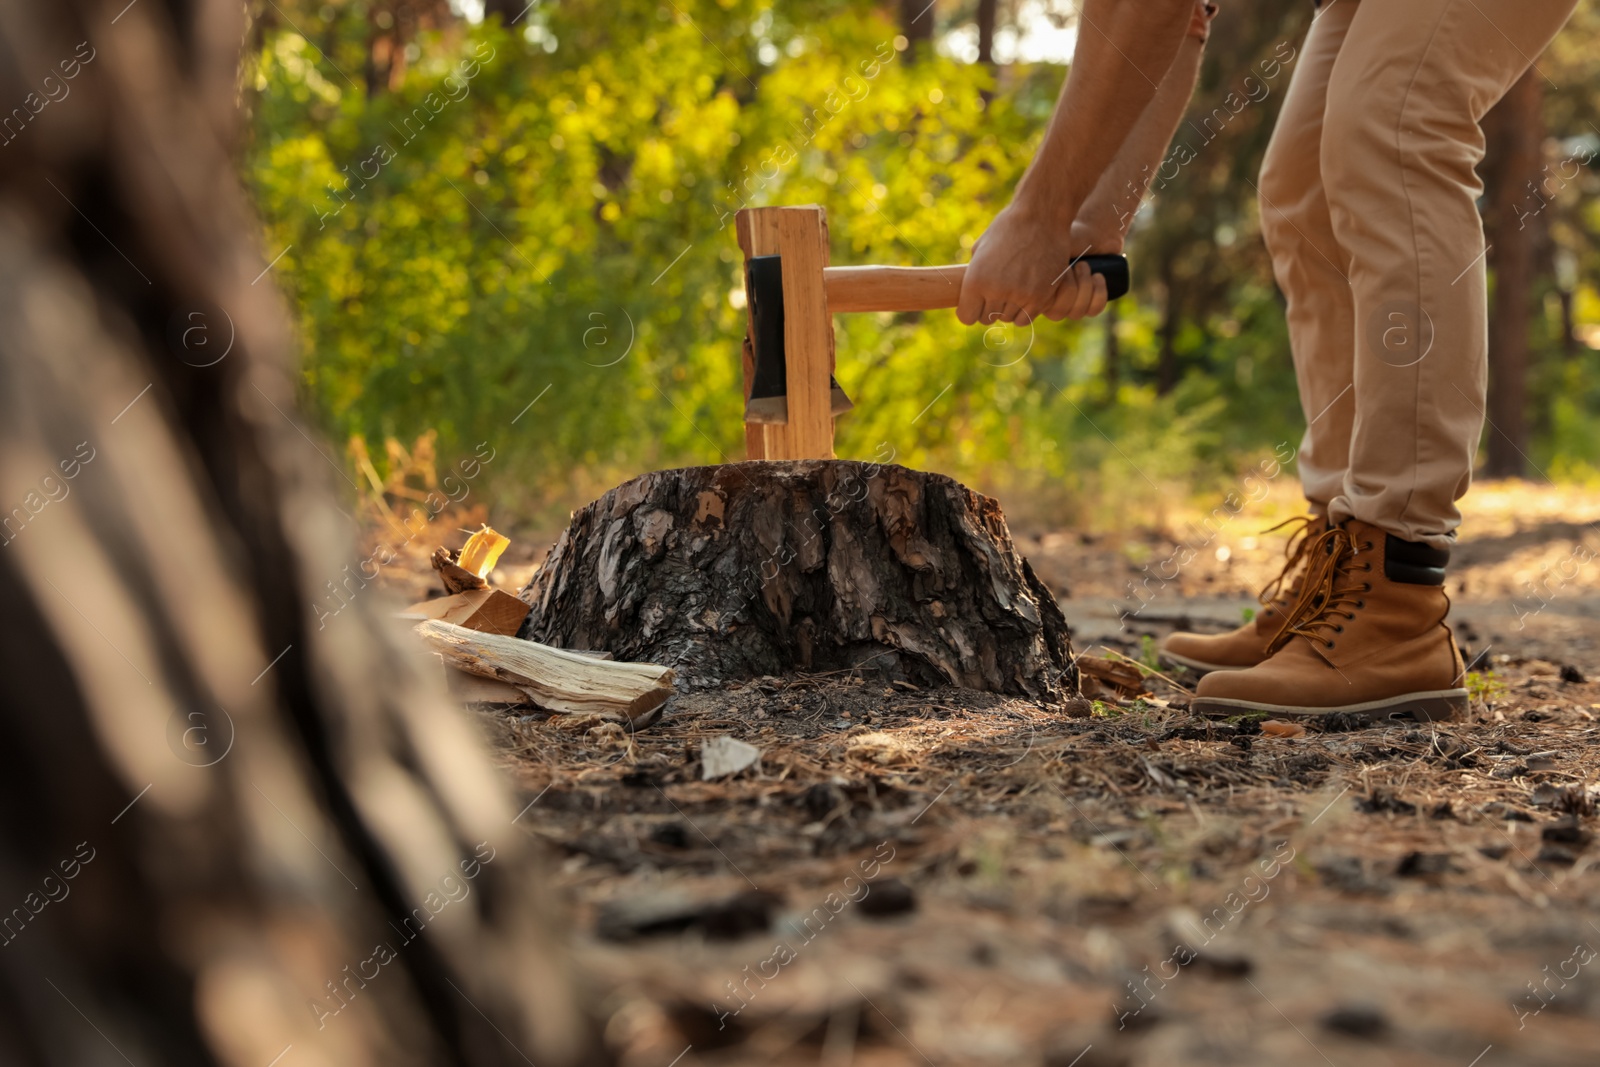 Photo of Man chopping firewood with axe in forest, closeup